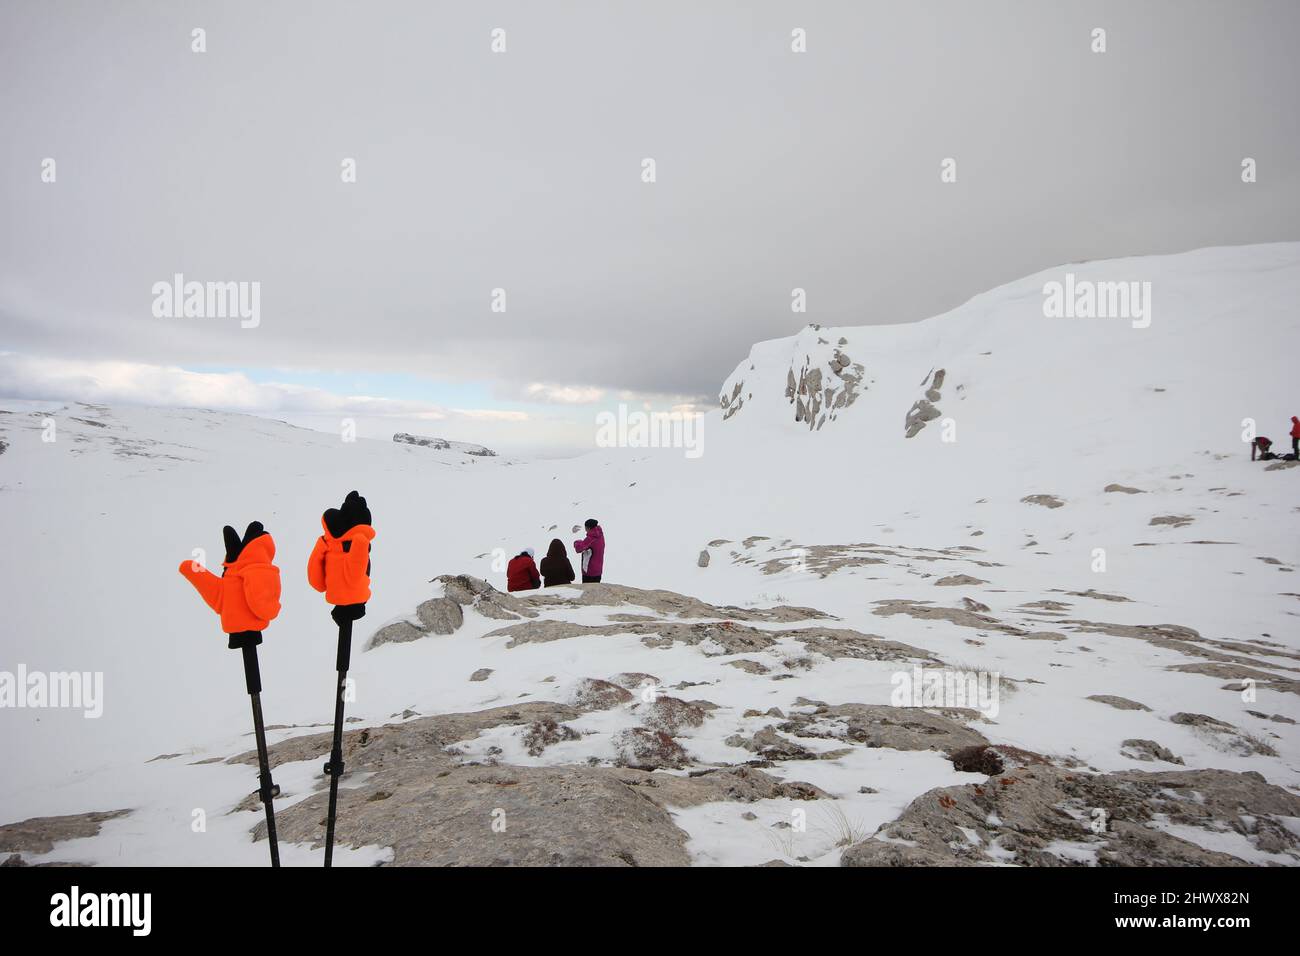 People resting after climbing. Gloves and walking poles. Stock Photo